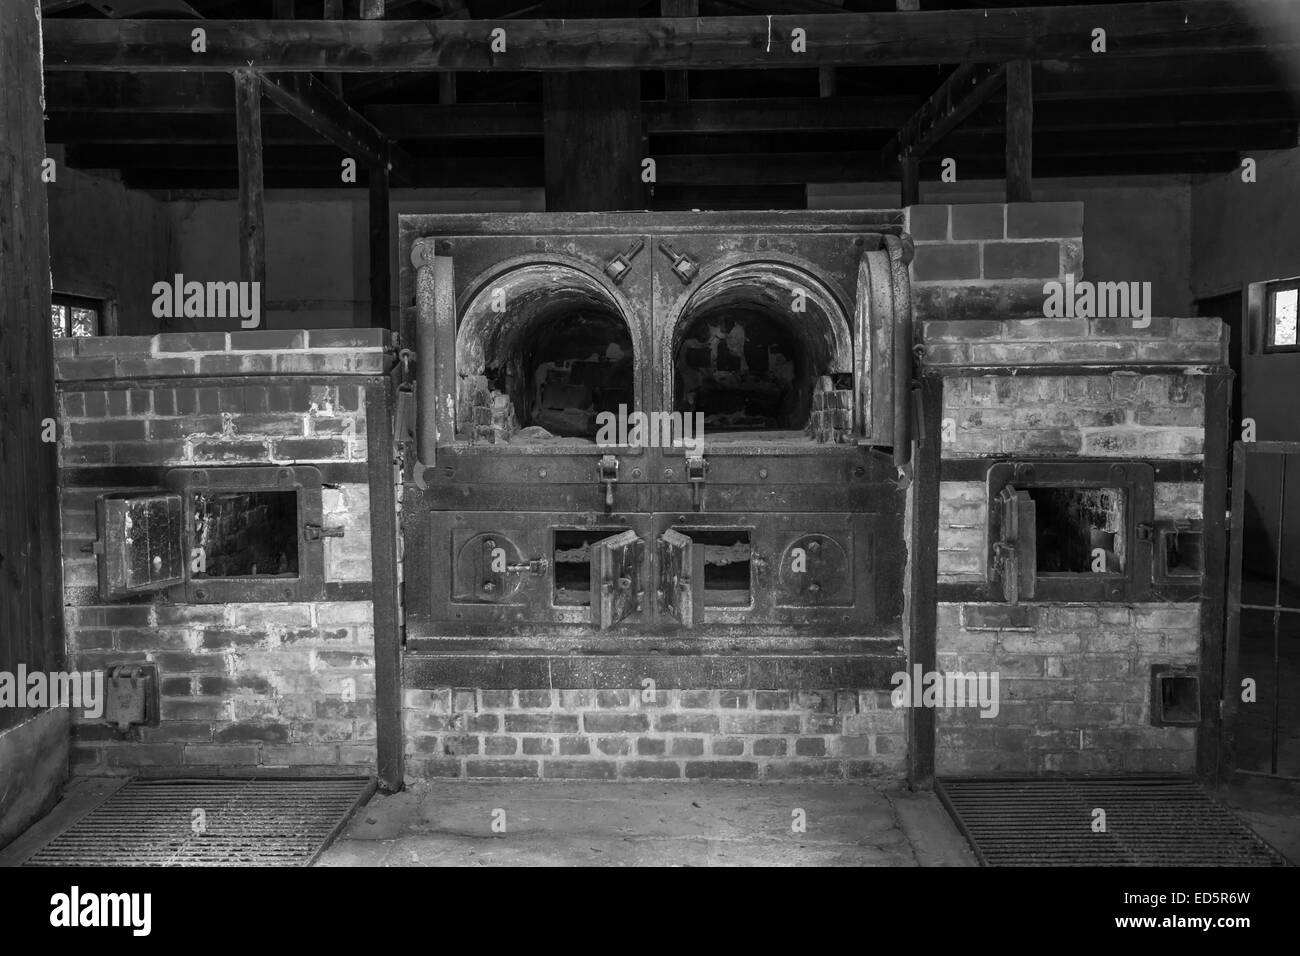 Vintage looking black and white photo of crematorium #1 in the Dachau concentration camp, Germany. Stock Photo